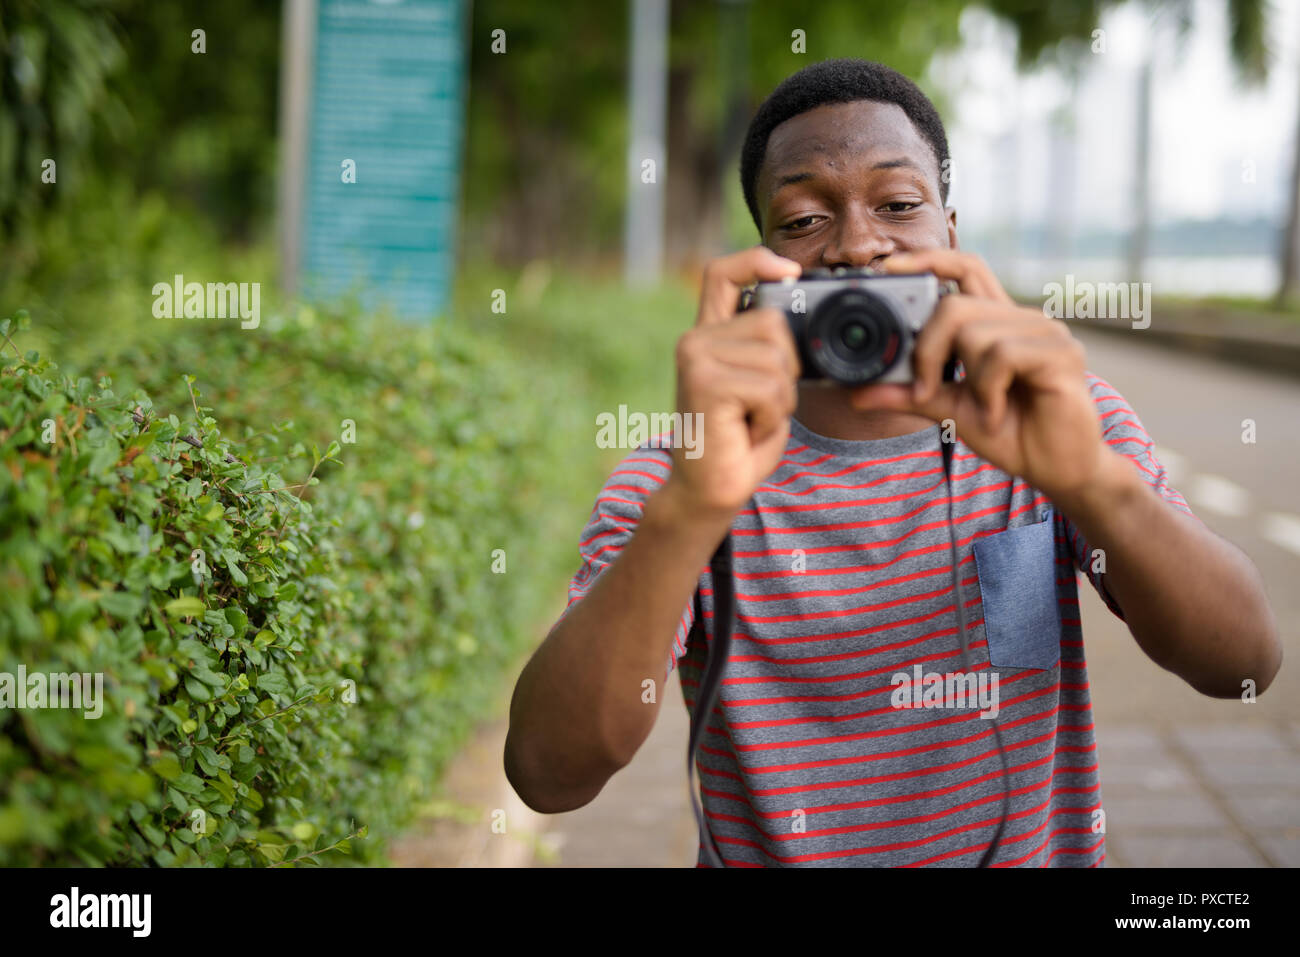 Young handsome African man taking pictures with camera in park Stock Photo